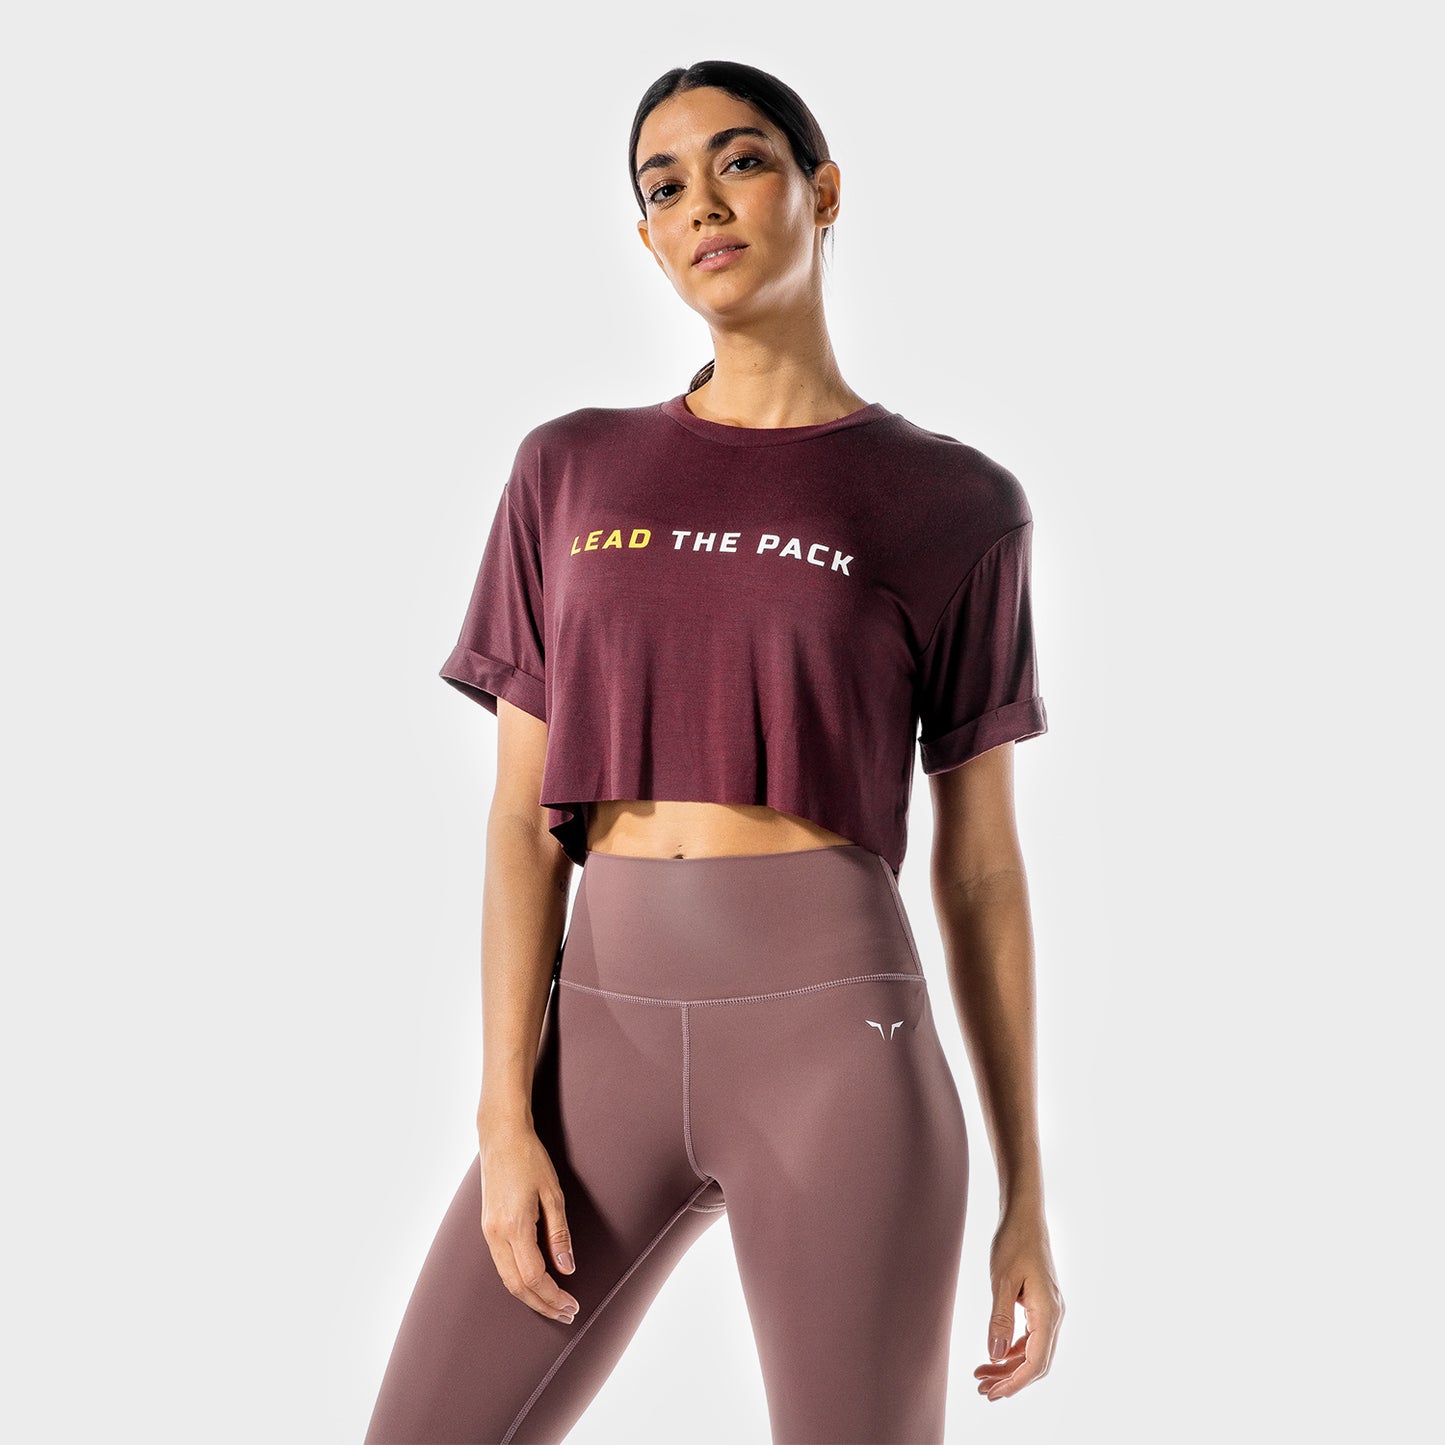 squatwolf-gym-t-shirts-for-women-the-pack-tee-plum-workout-clothes